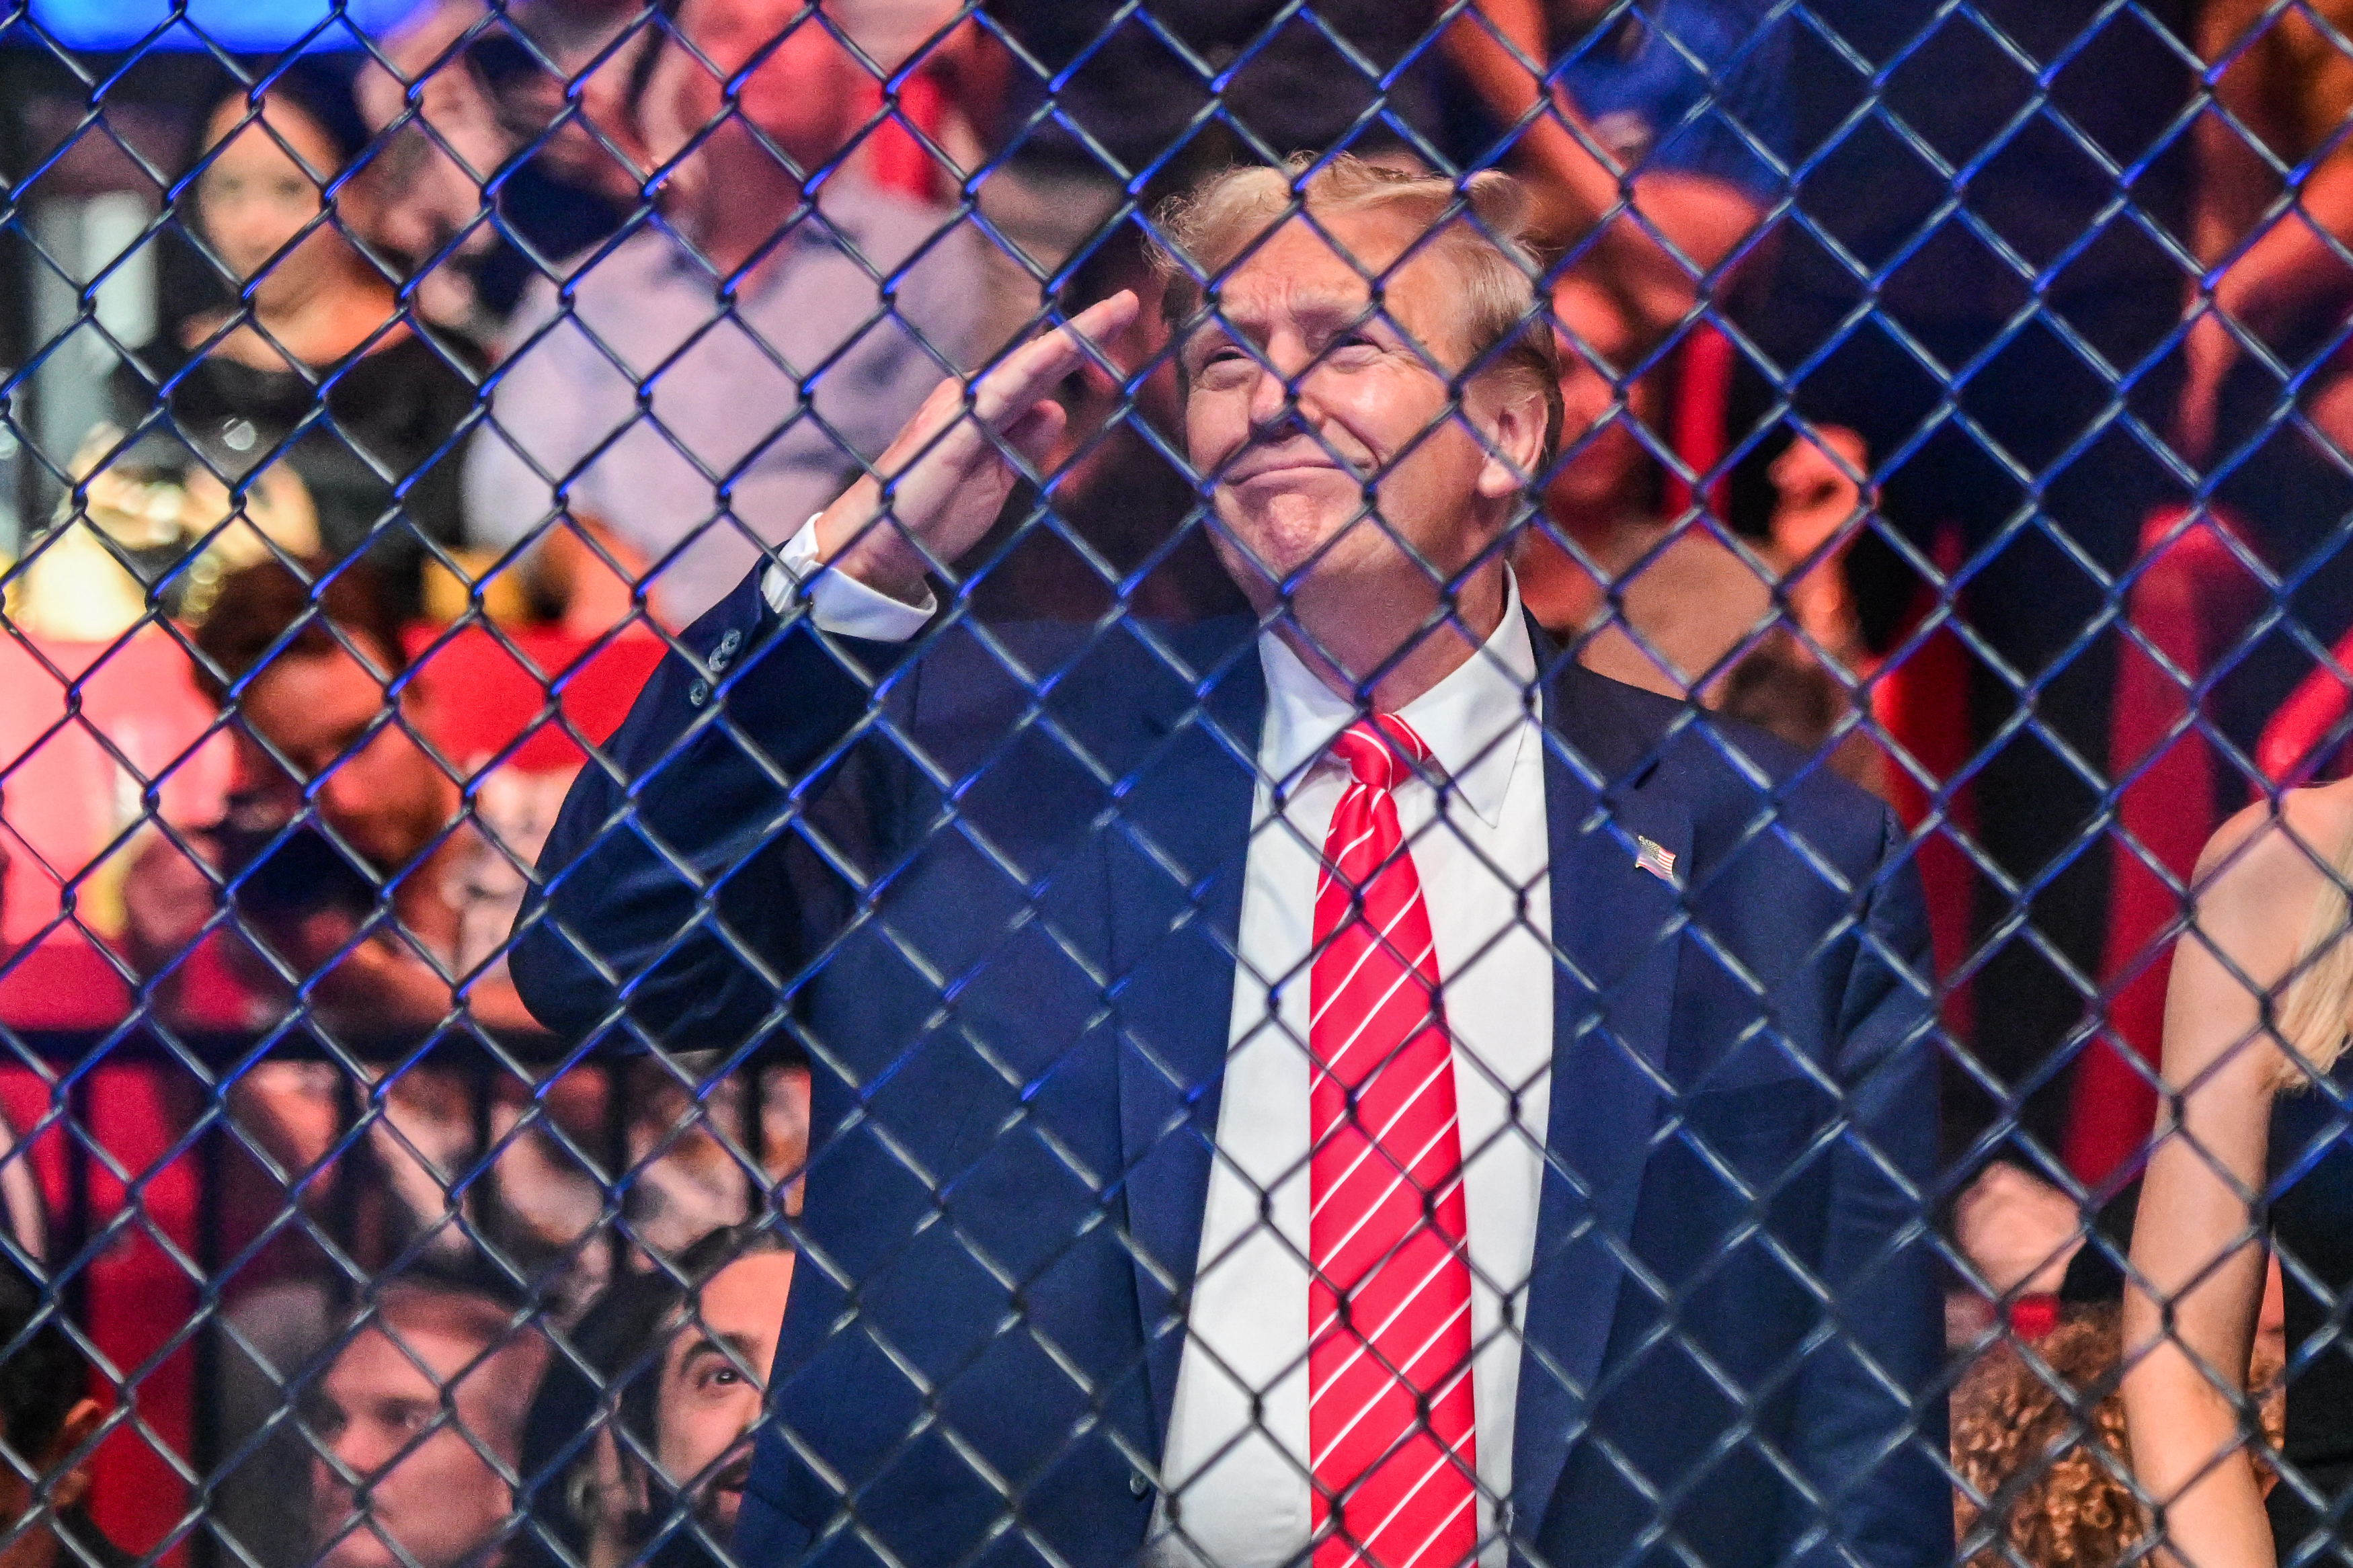 Donald Trump saluting behind a fence with a crowd behind him